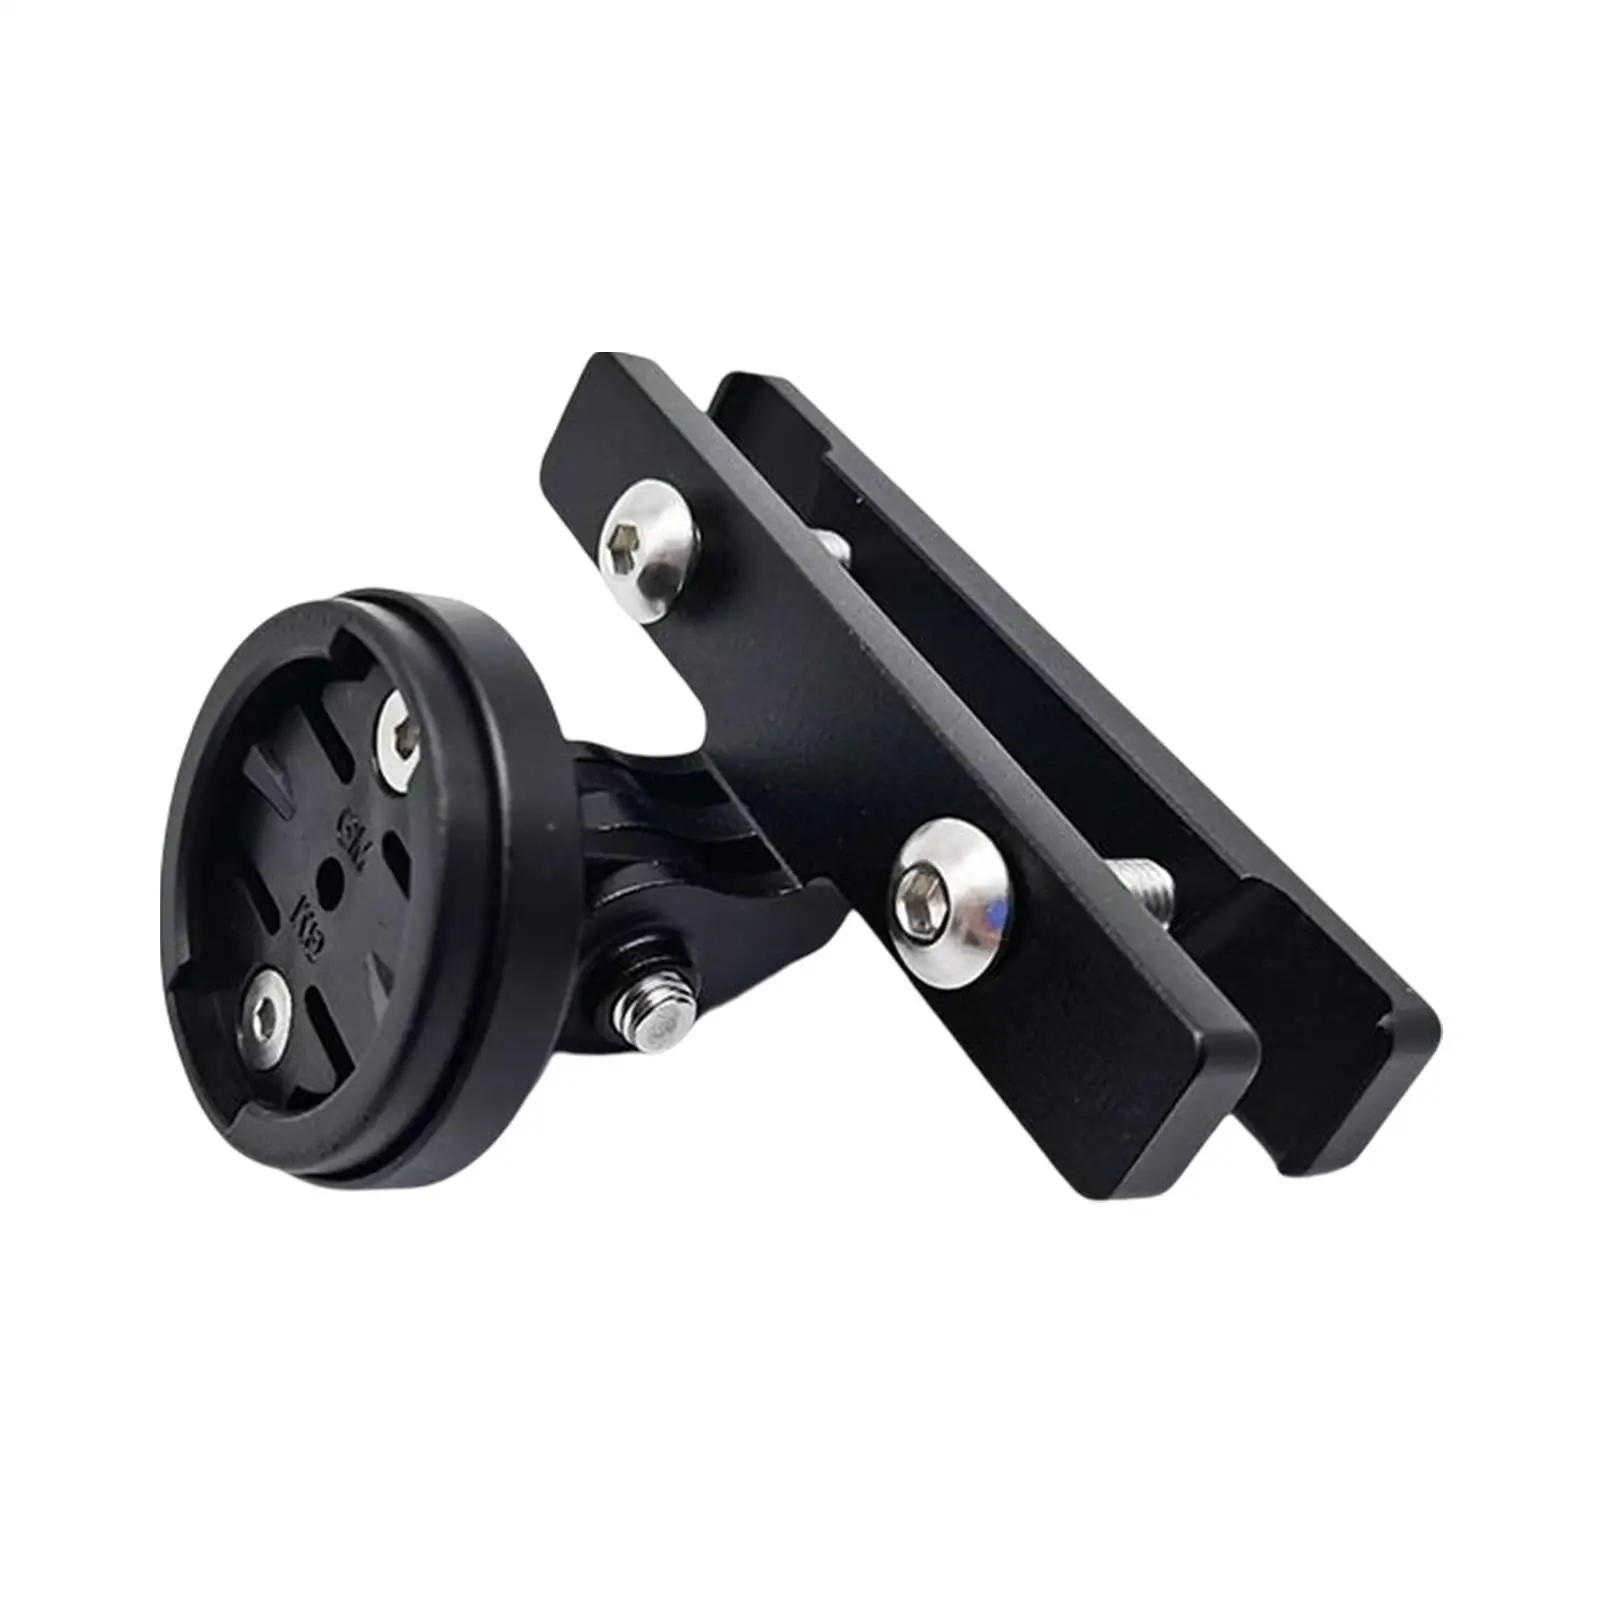 bike Bracket Seatpost Mount bike Saddle Support for Support Rearview Accessories